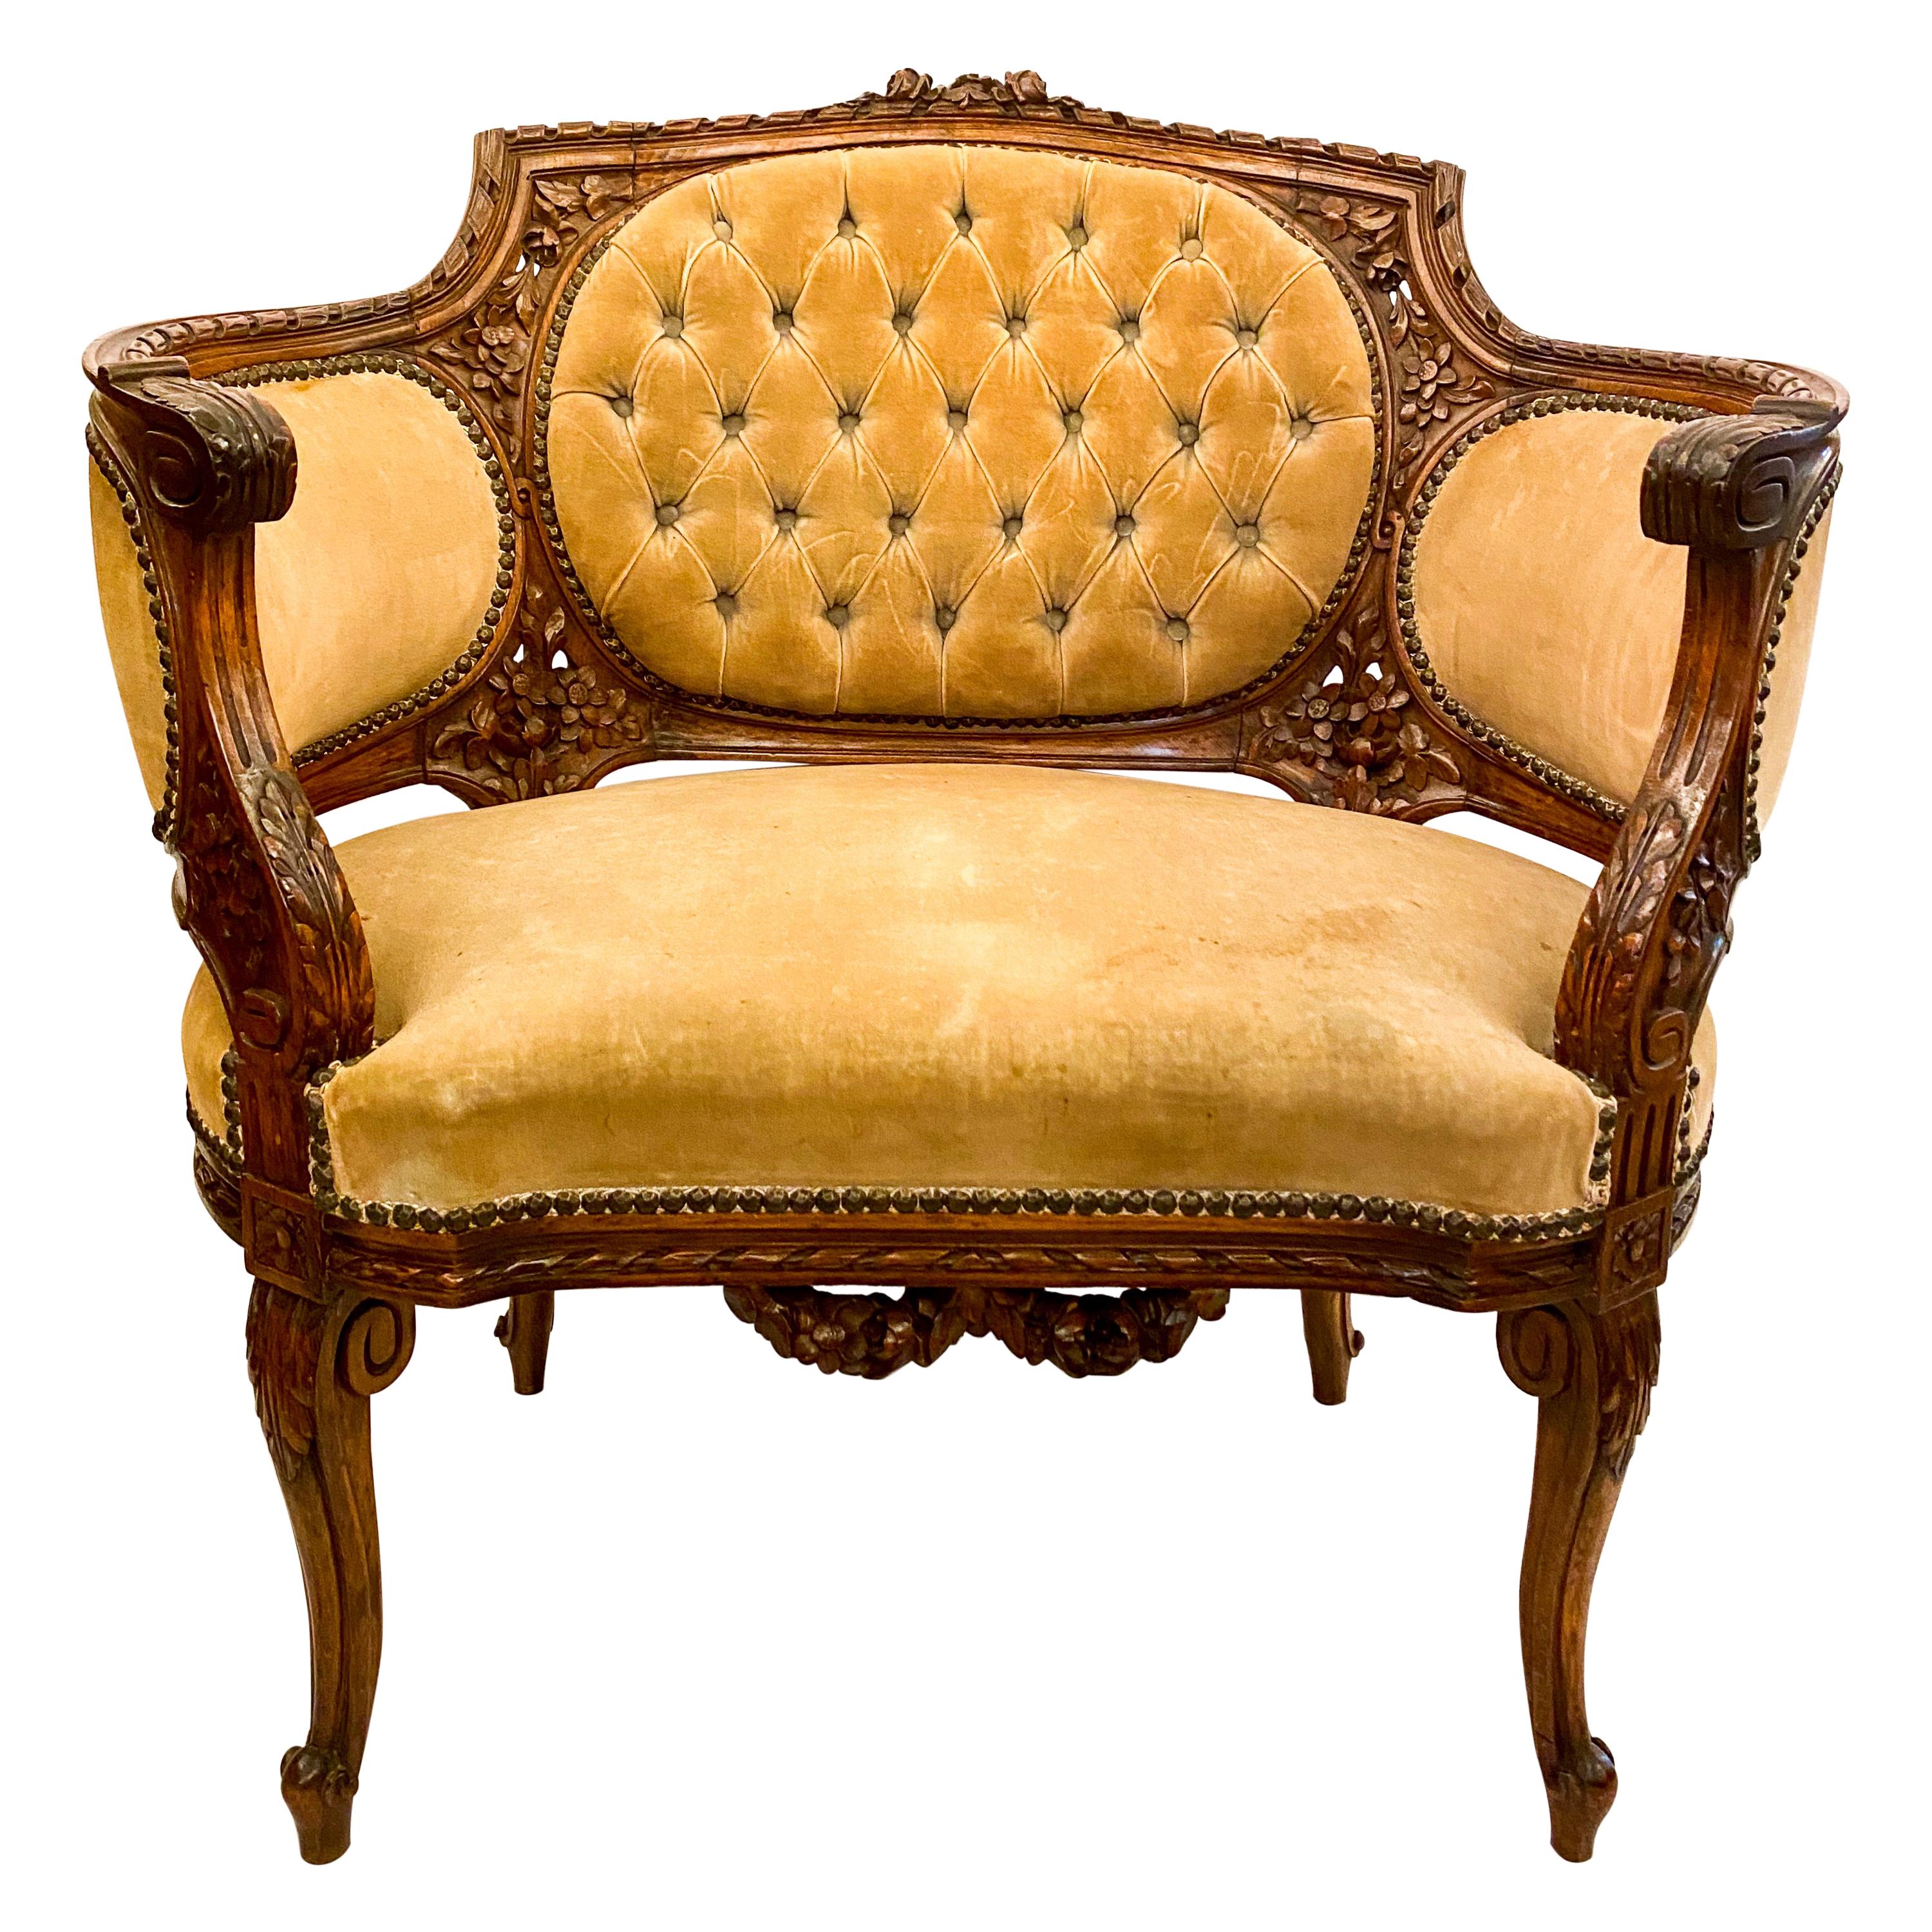 Antique French Carved Walnut Bergère Chair, circa 1870s